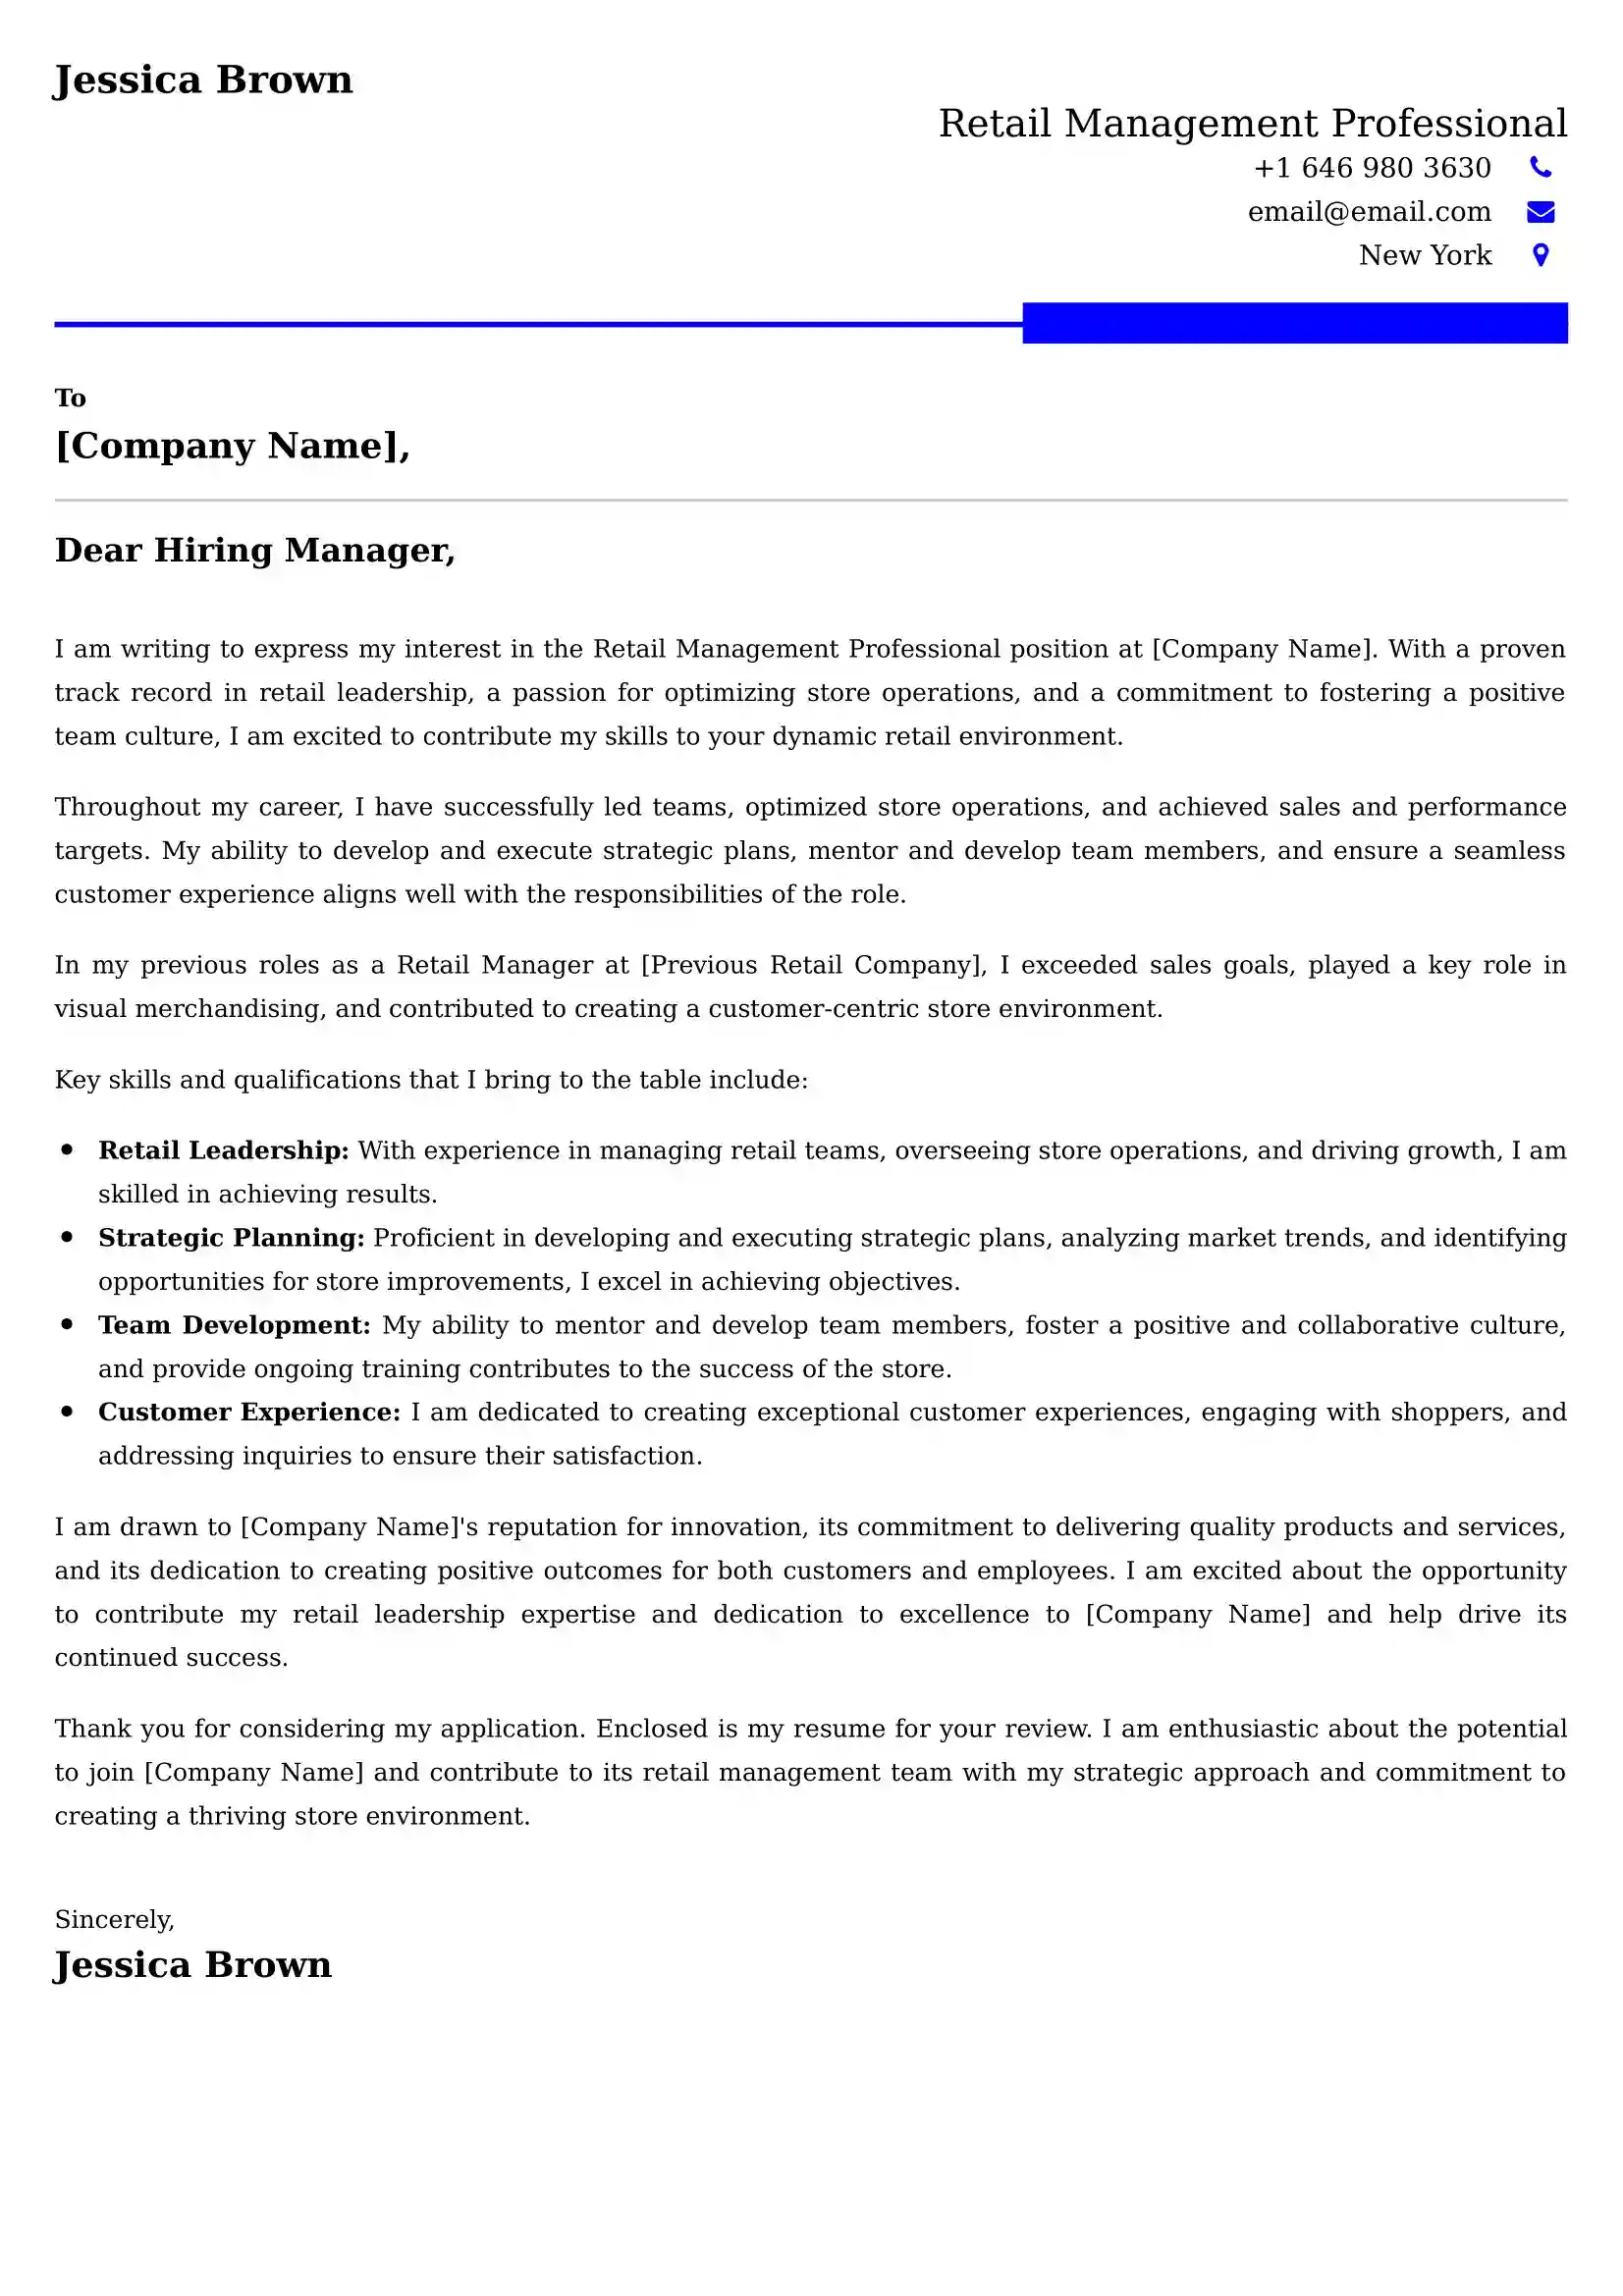 Retail Management Professional Cover Letter Examples -Latest Brazilian Templates